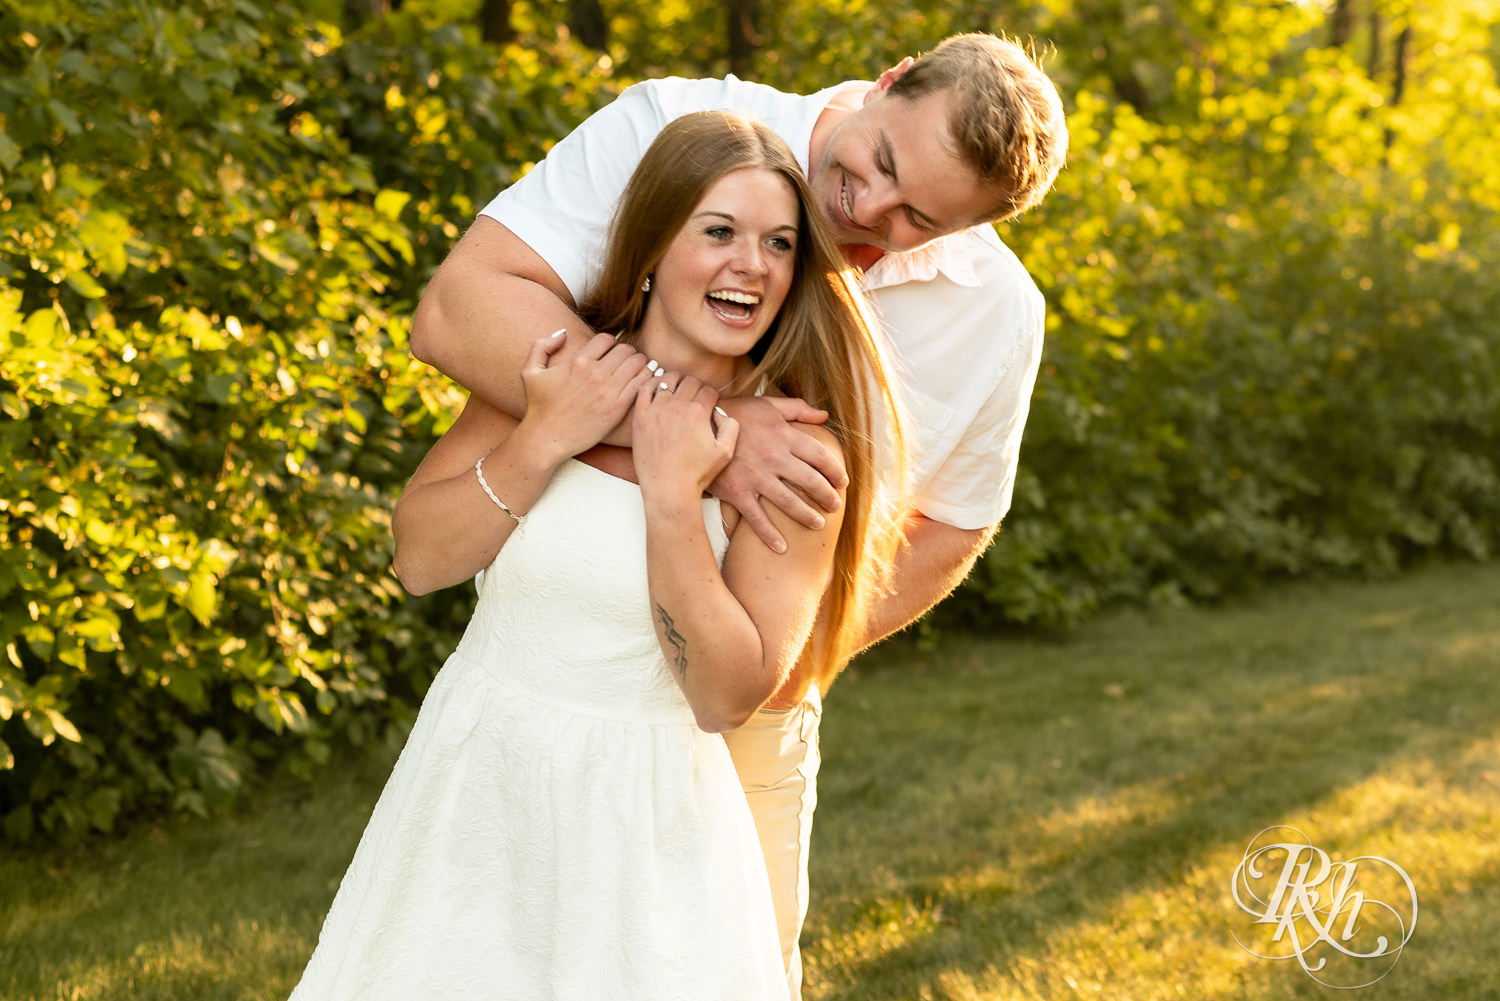 Man in white shirt and woman in white dress laugh during golden hour engagement photography at Lebanon Hills in Eagan, Minnesota.